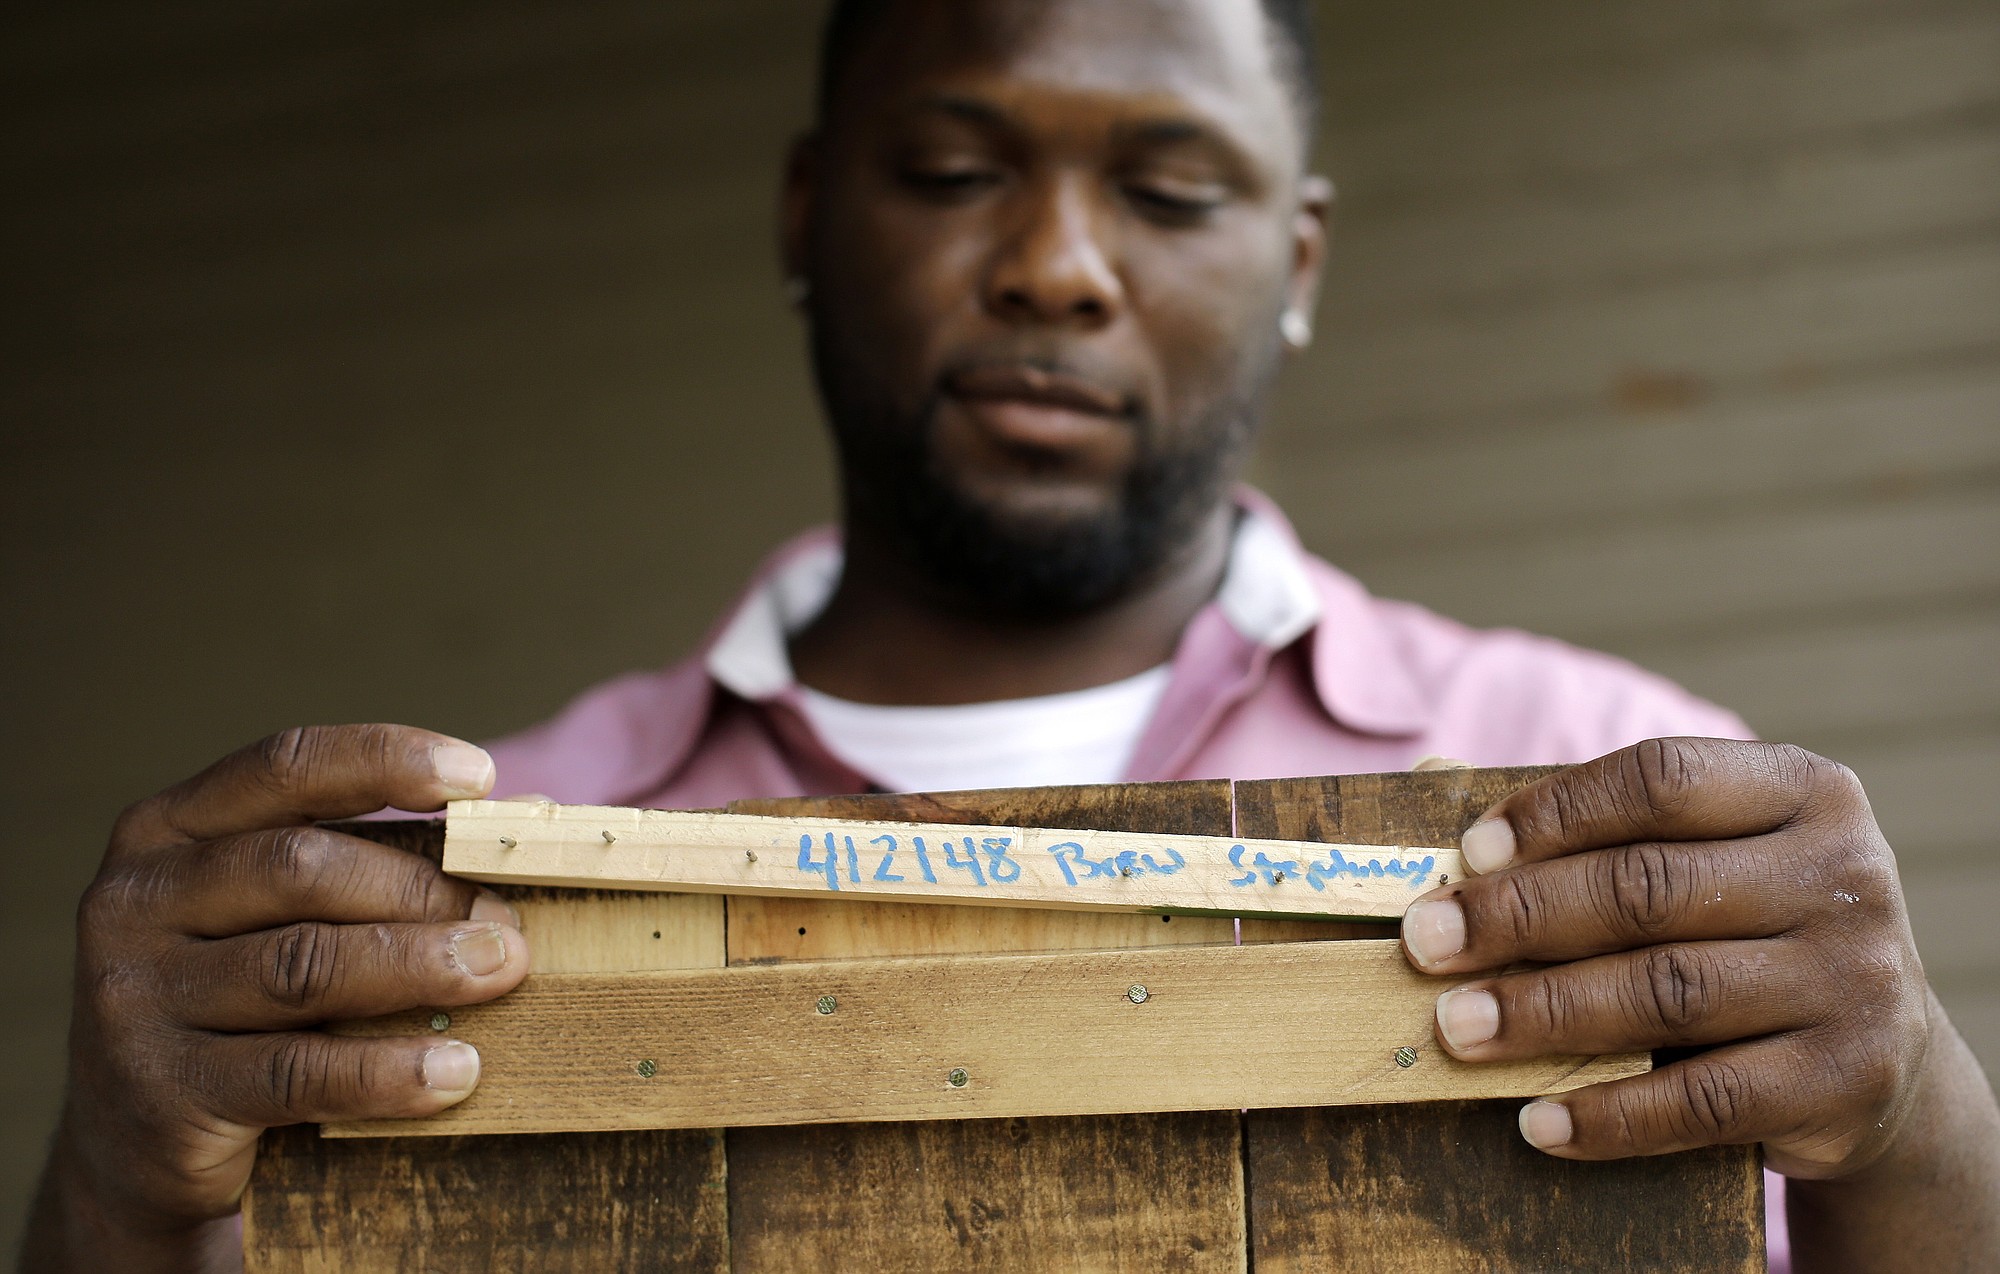 Larry Stephney holds a piece of wood with the number 412148 written on it that is from a product made while he was an inmate at a privately run prison in Nashville, Tenn.